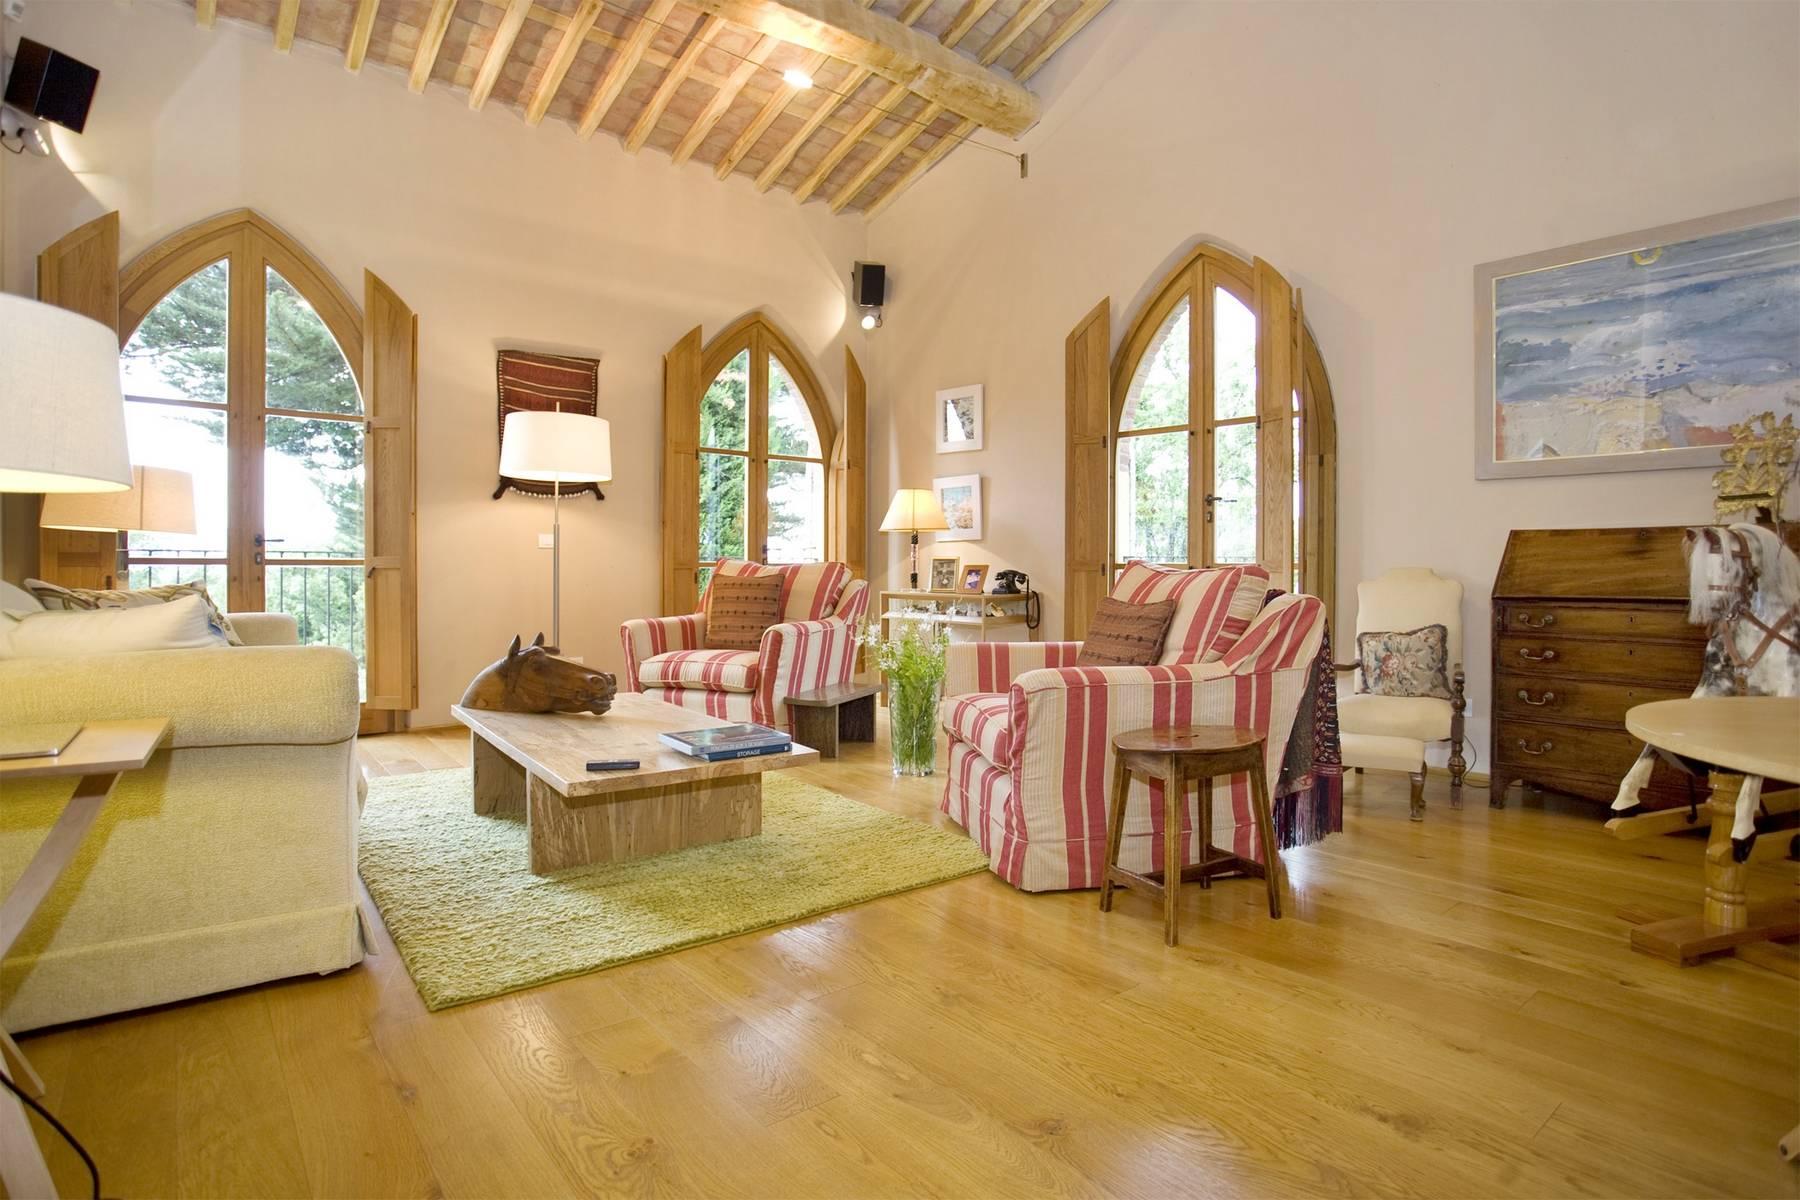 Remarkable luxury villa with olive grove and vineyard in the countryside of Lucca - 11